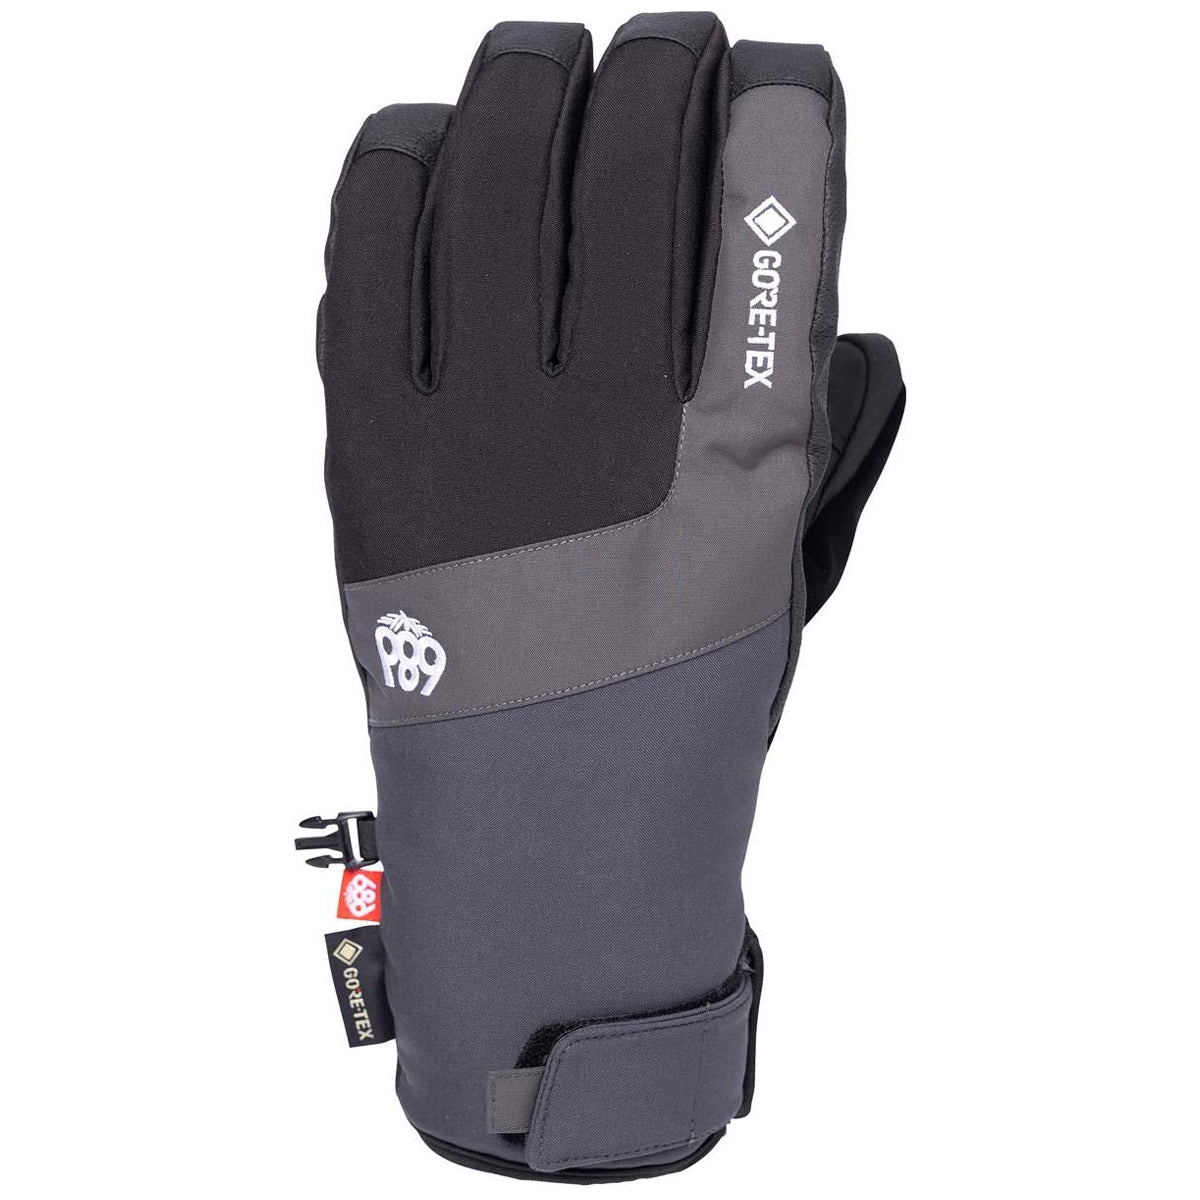 686 Gore Linear Under Cuff Snowboard Gloves - Charcoal image 1